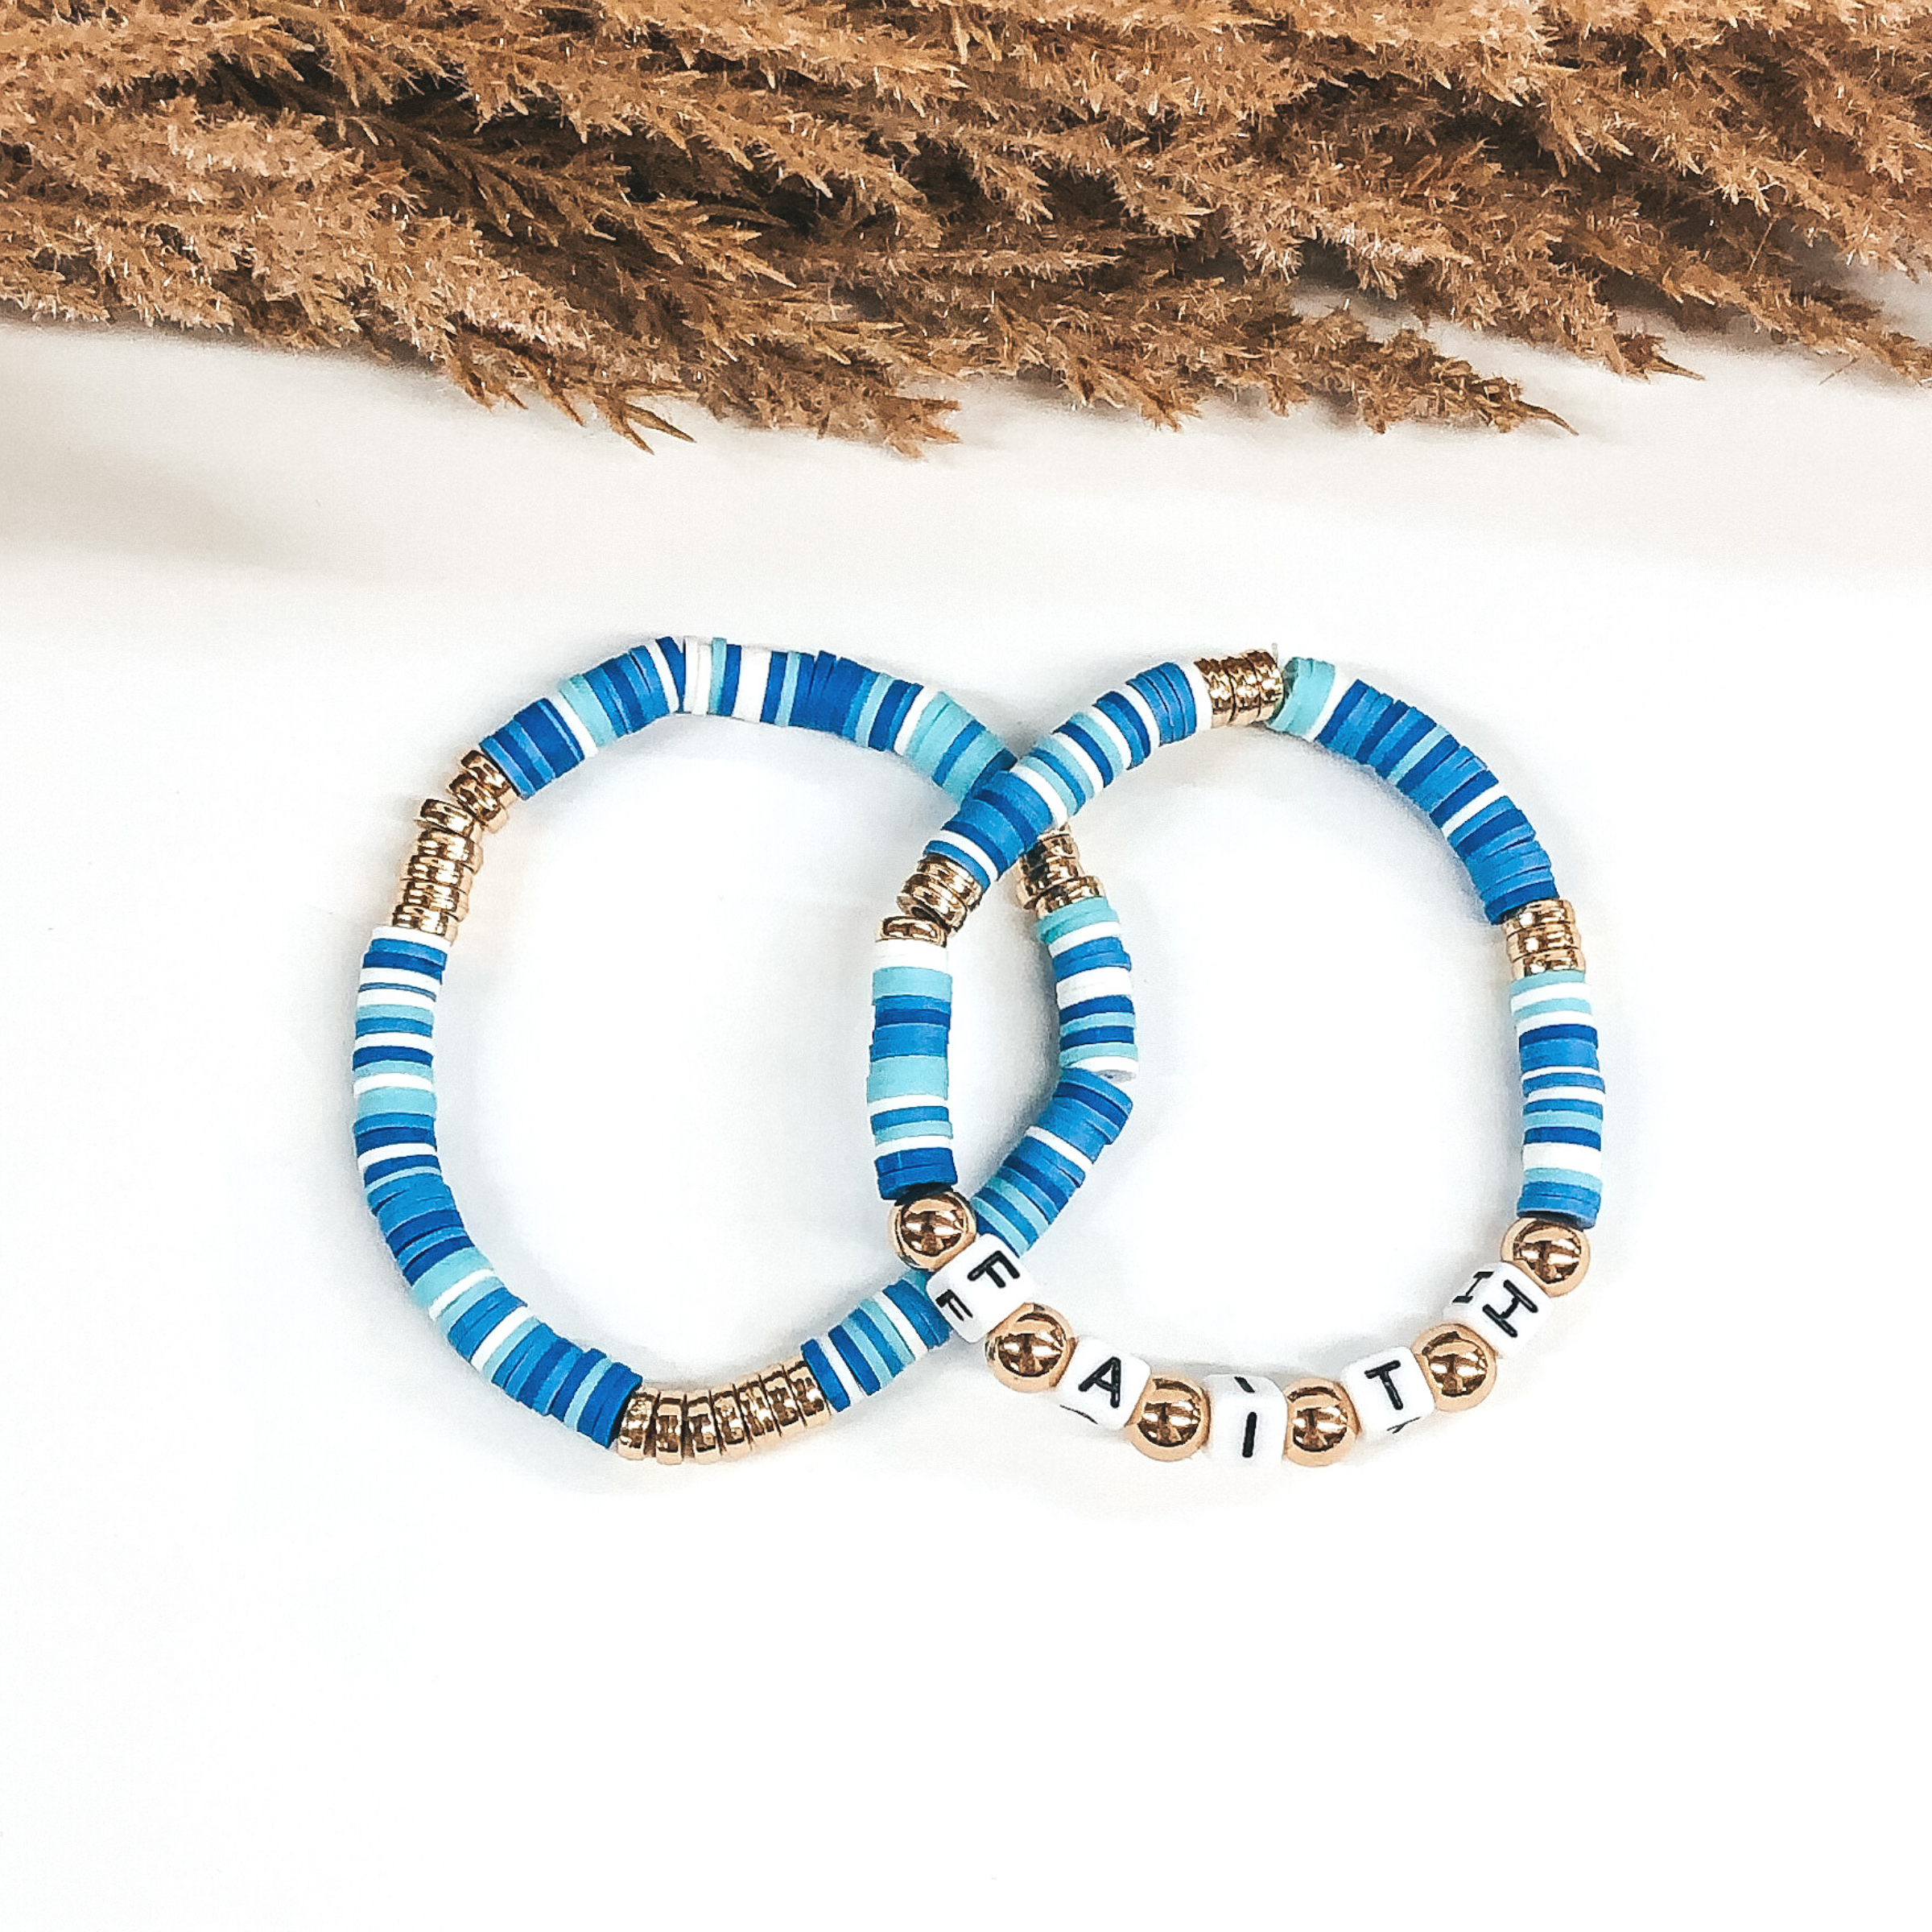 Two bracelets that has a mix of blue colors and white disk beads. On one bracelet, you have three sections of gold disc beads. On the other bracelet you have three smaller section of gold disc beads and then letter beads that spell out "FAITH" with gold spacers in between. These bracelets are pictured on a white background. 